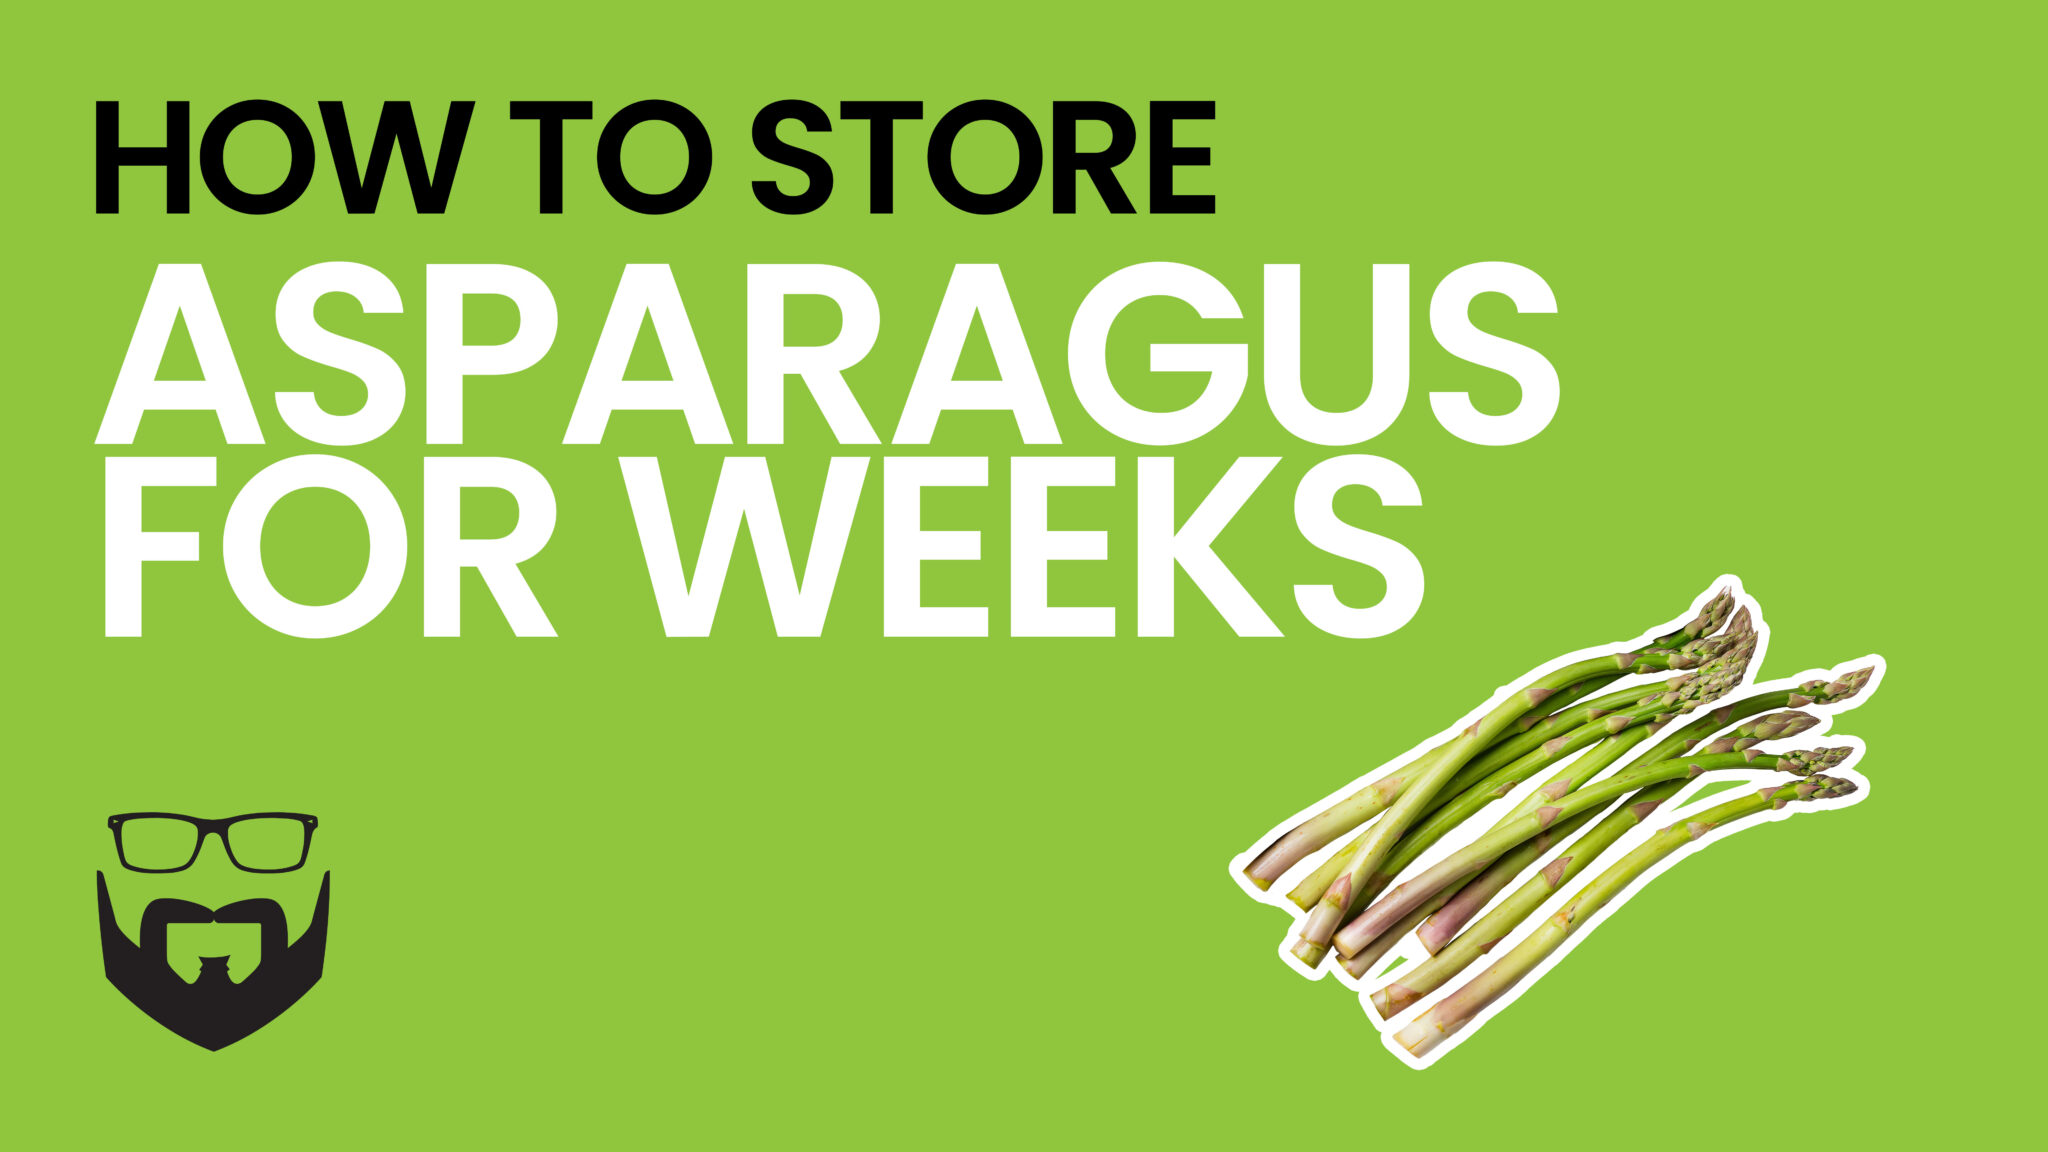 How To Store Asparagus For Weeks Video - Green